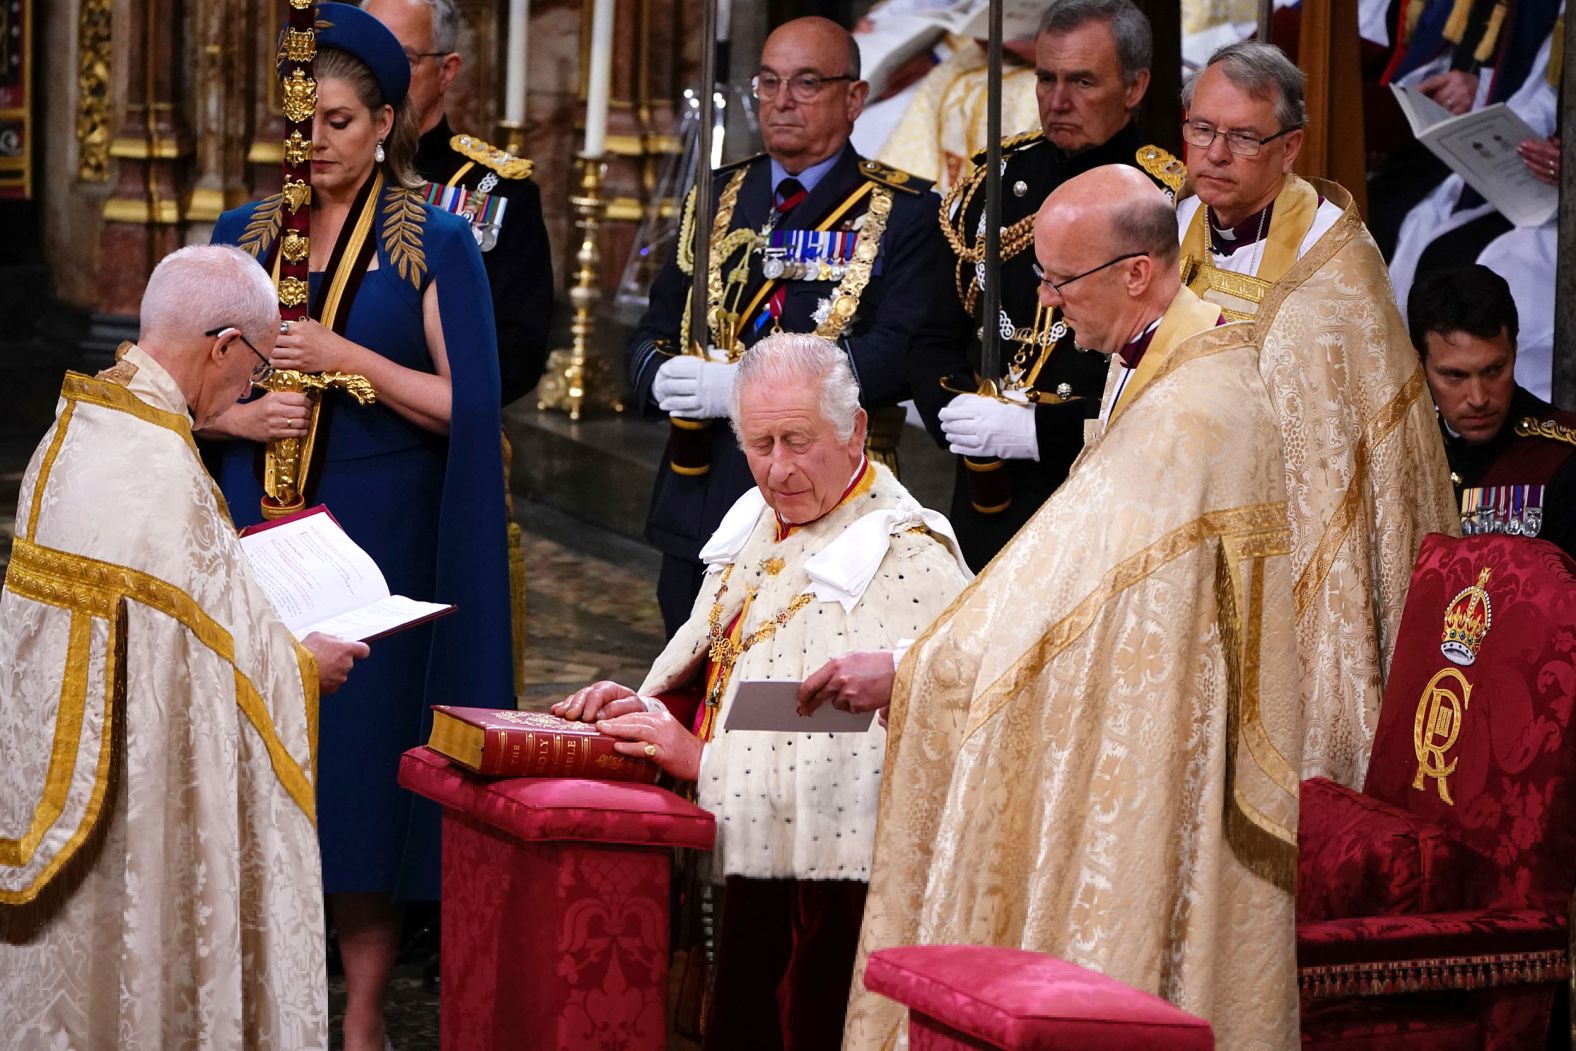 The King places his hands on the Coronation Bible as he <a href="index.php?page=&url=https%3A%2F%2Fwww.cnn.com%2Fuk%2Flive-news%2Fking-charles-iii-coronation-ckc-intl-gbr%2Fh_329d6fba5cd3c92110395f5152360553" target="_blank">takes the Coronation Oath</a>.